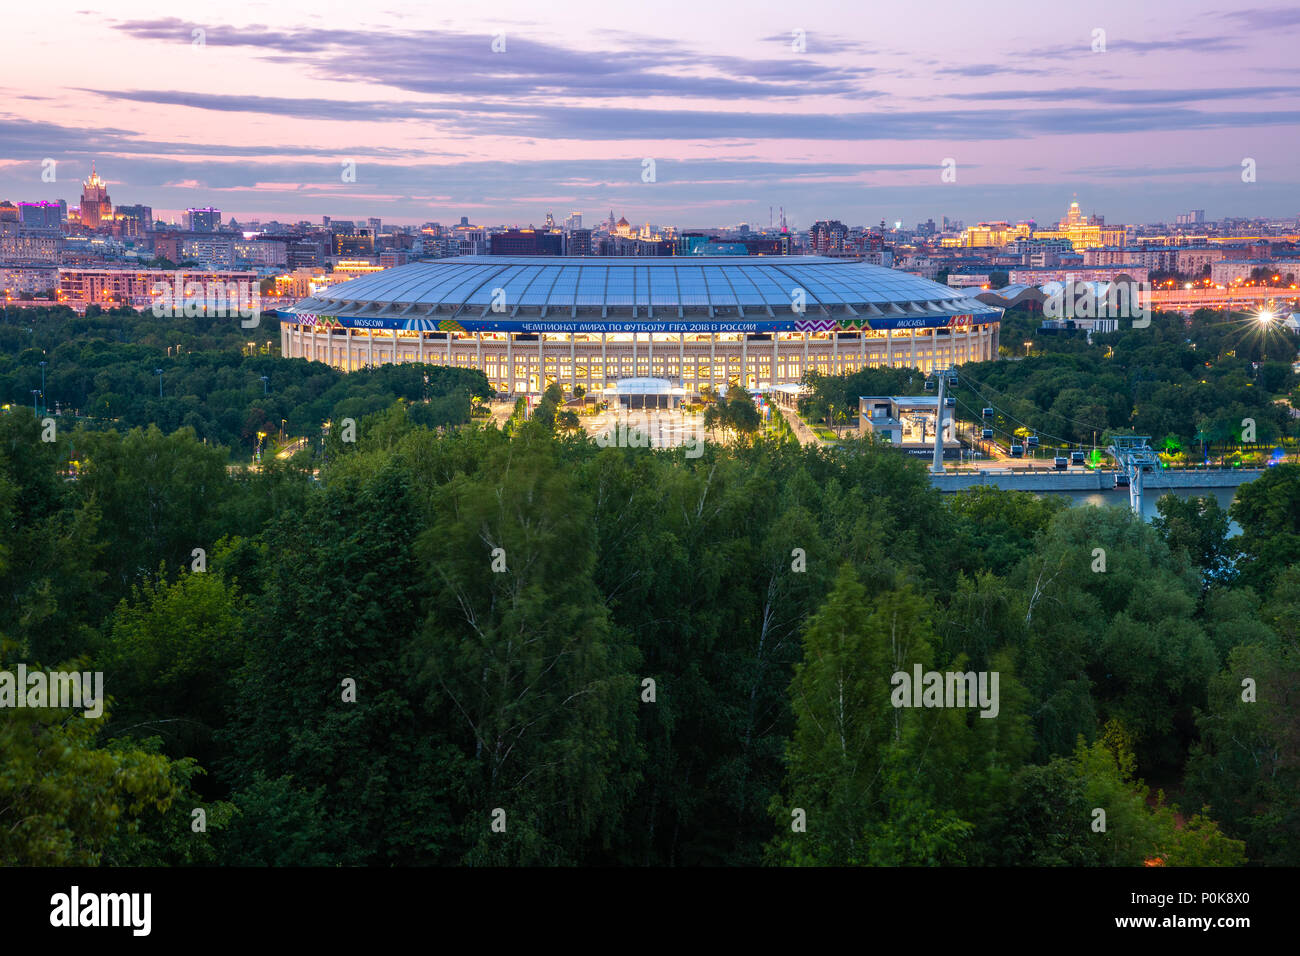 Moscow, Russia - June 06, 2018: The dusk view of Luzhniki Stadium from Sparrow Hills observation deck, the main stadium of 2018 FIFA World Cup, June 0 Stock Photo